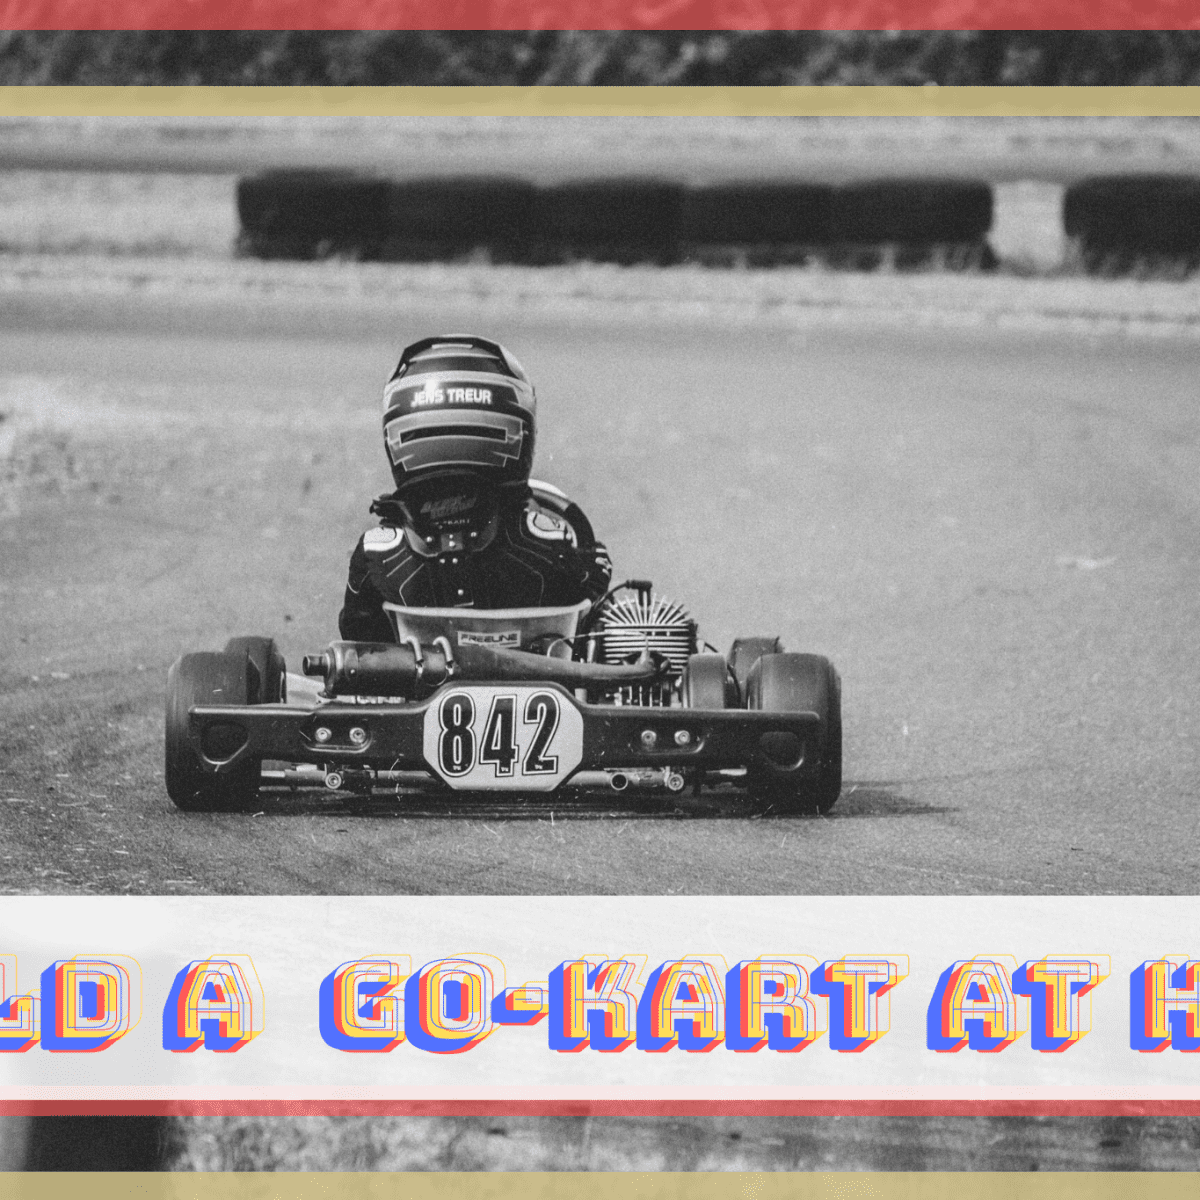 Karting 101: Getting Started in Competitive Go Kart Racing